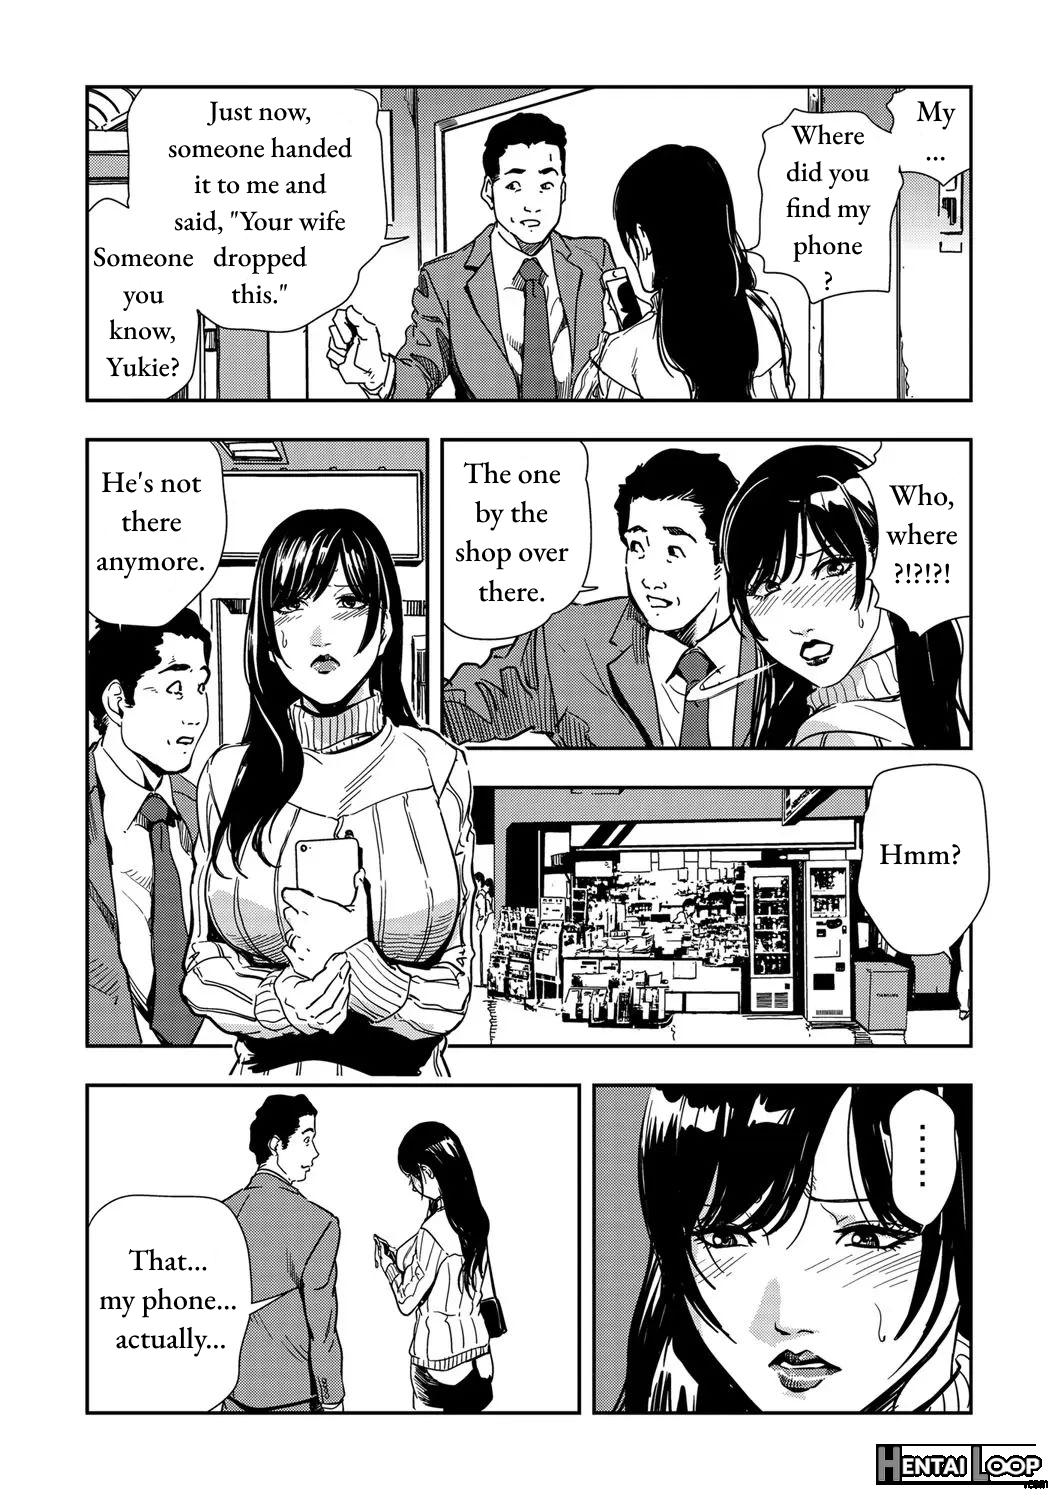 Chikan Express Ch. 02 page 7